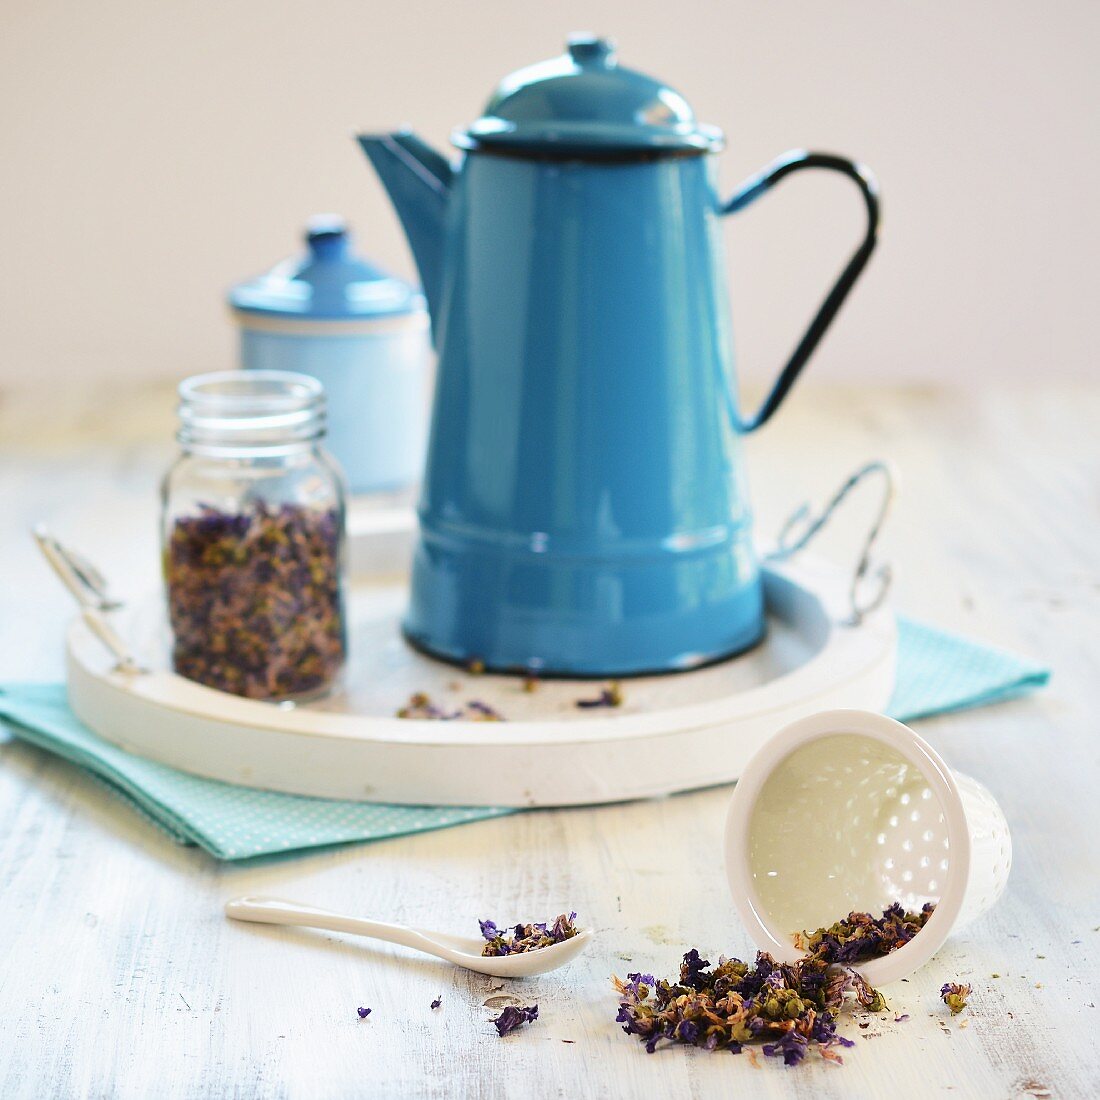 Mallow tea in a teapot with a glass jar and tea sieve